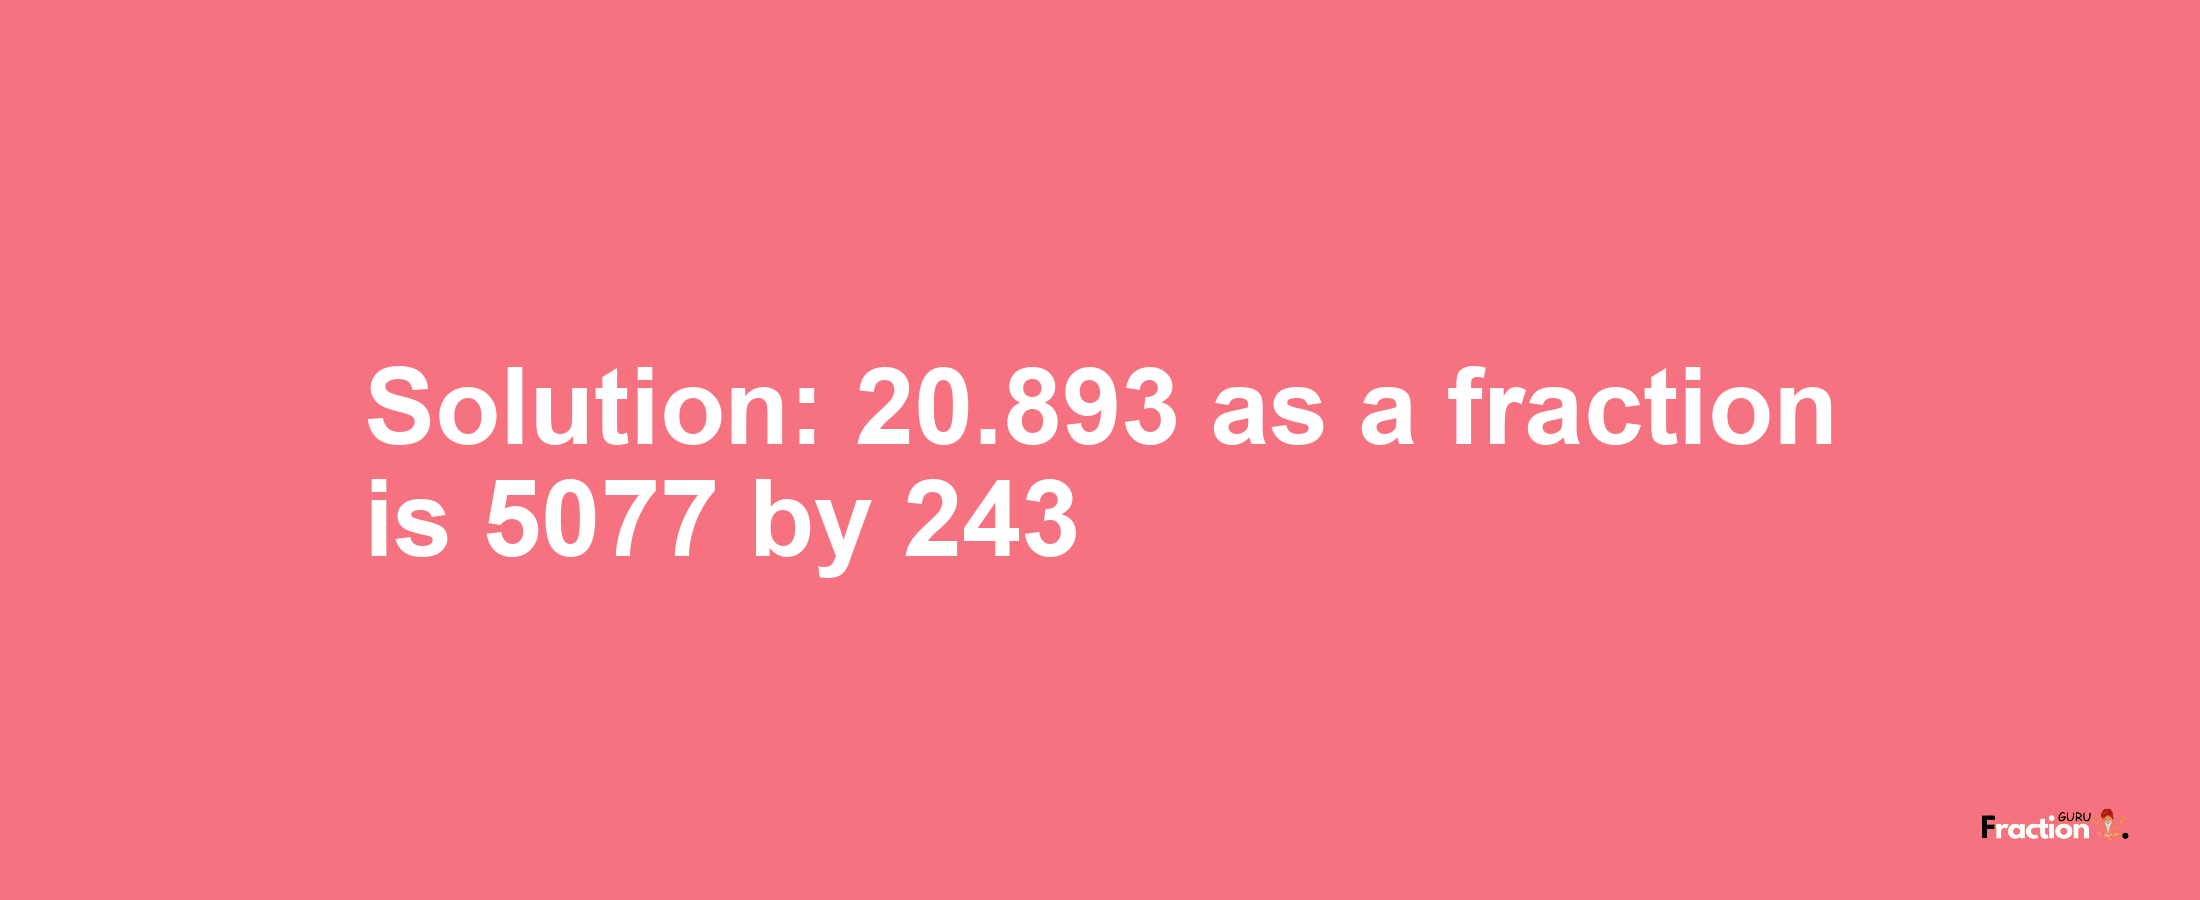 Solution:20.893 as a fraction is 5077/243